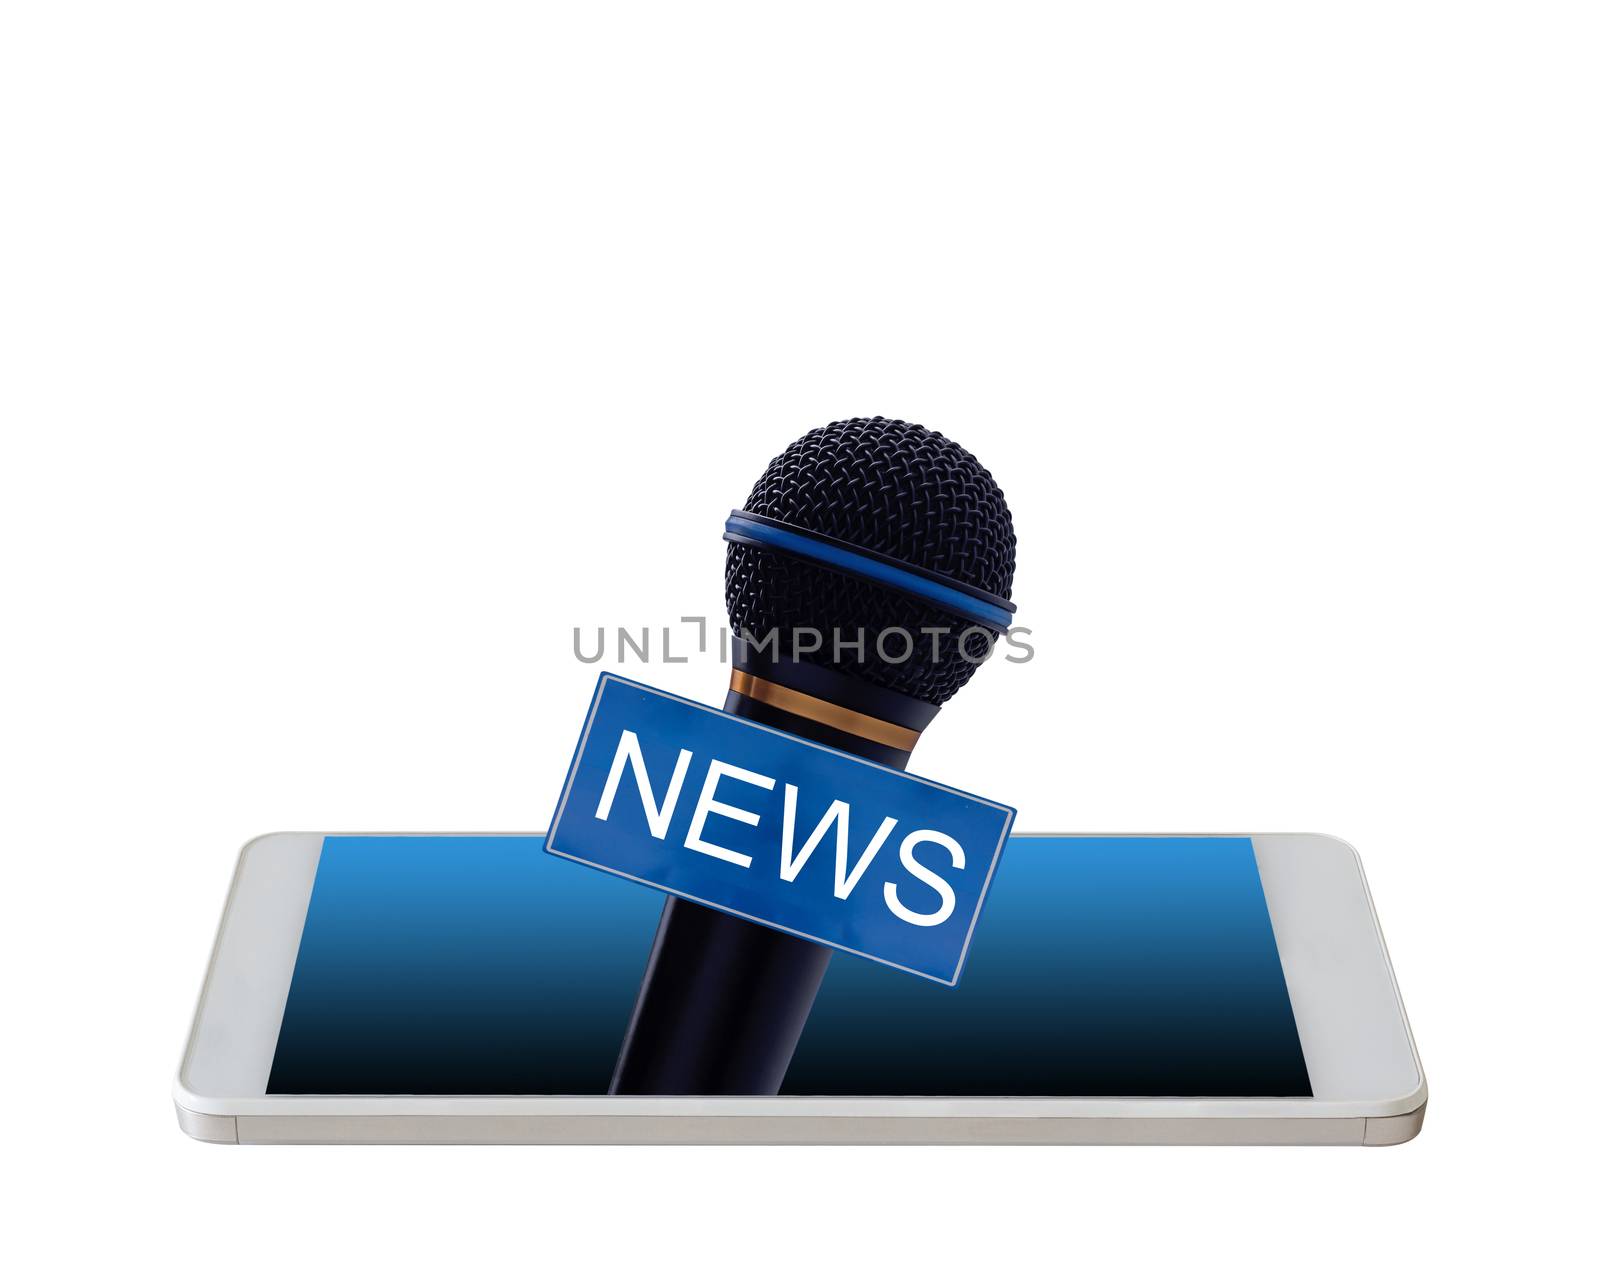 News concept, microphone and mobile phone on white background